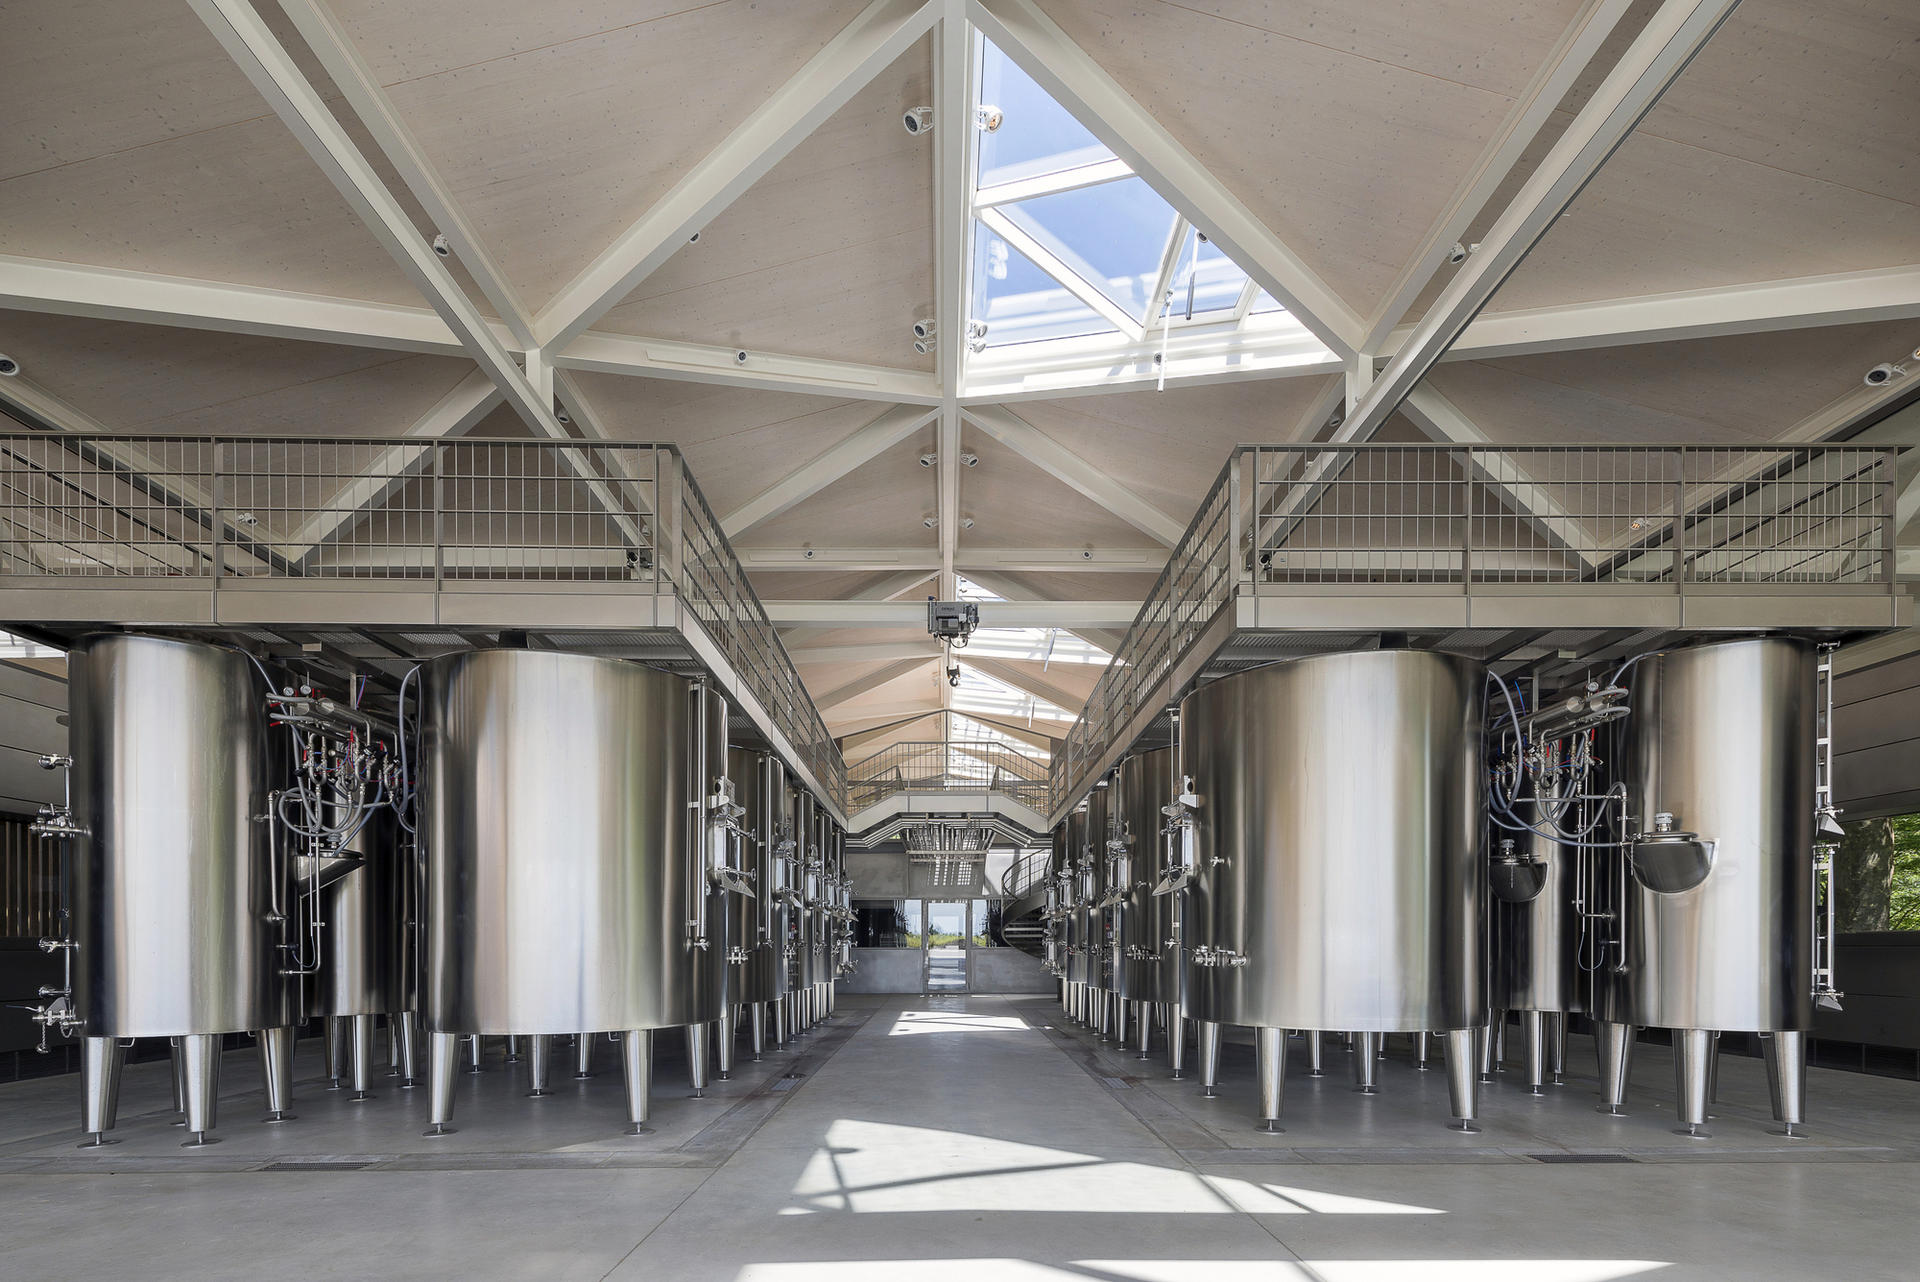 Norman Foster designed the new cellars at Chateau Margaux.